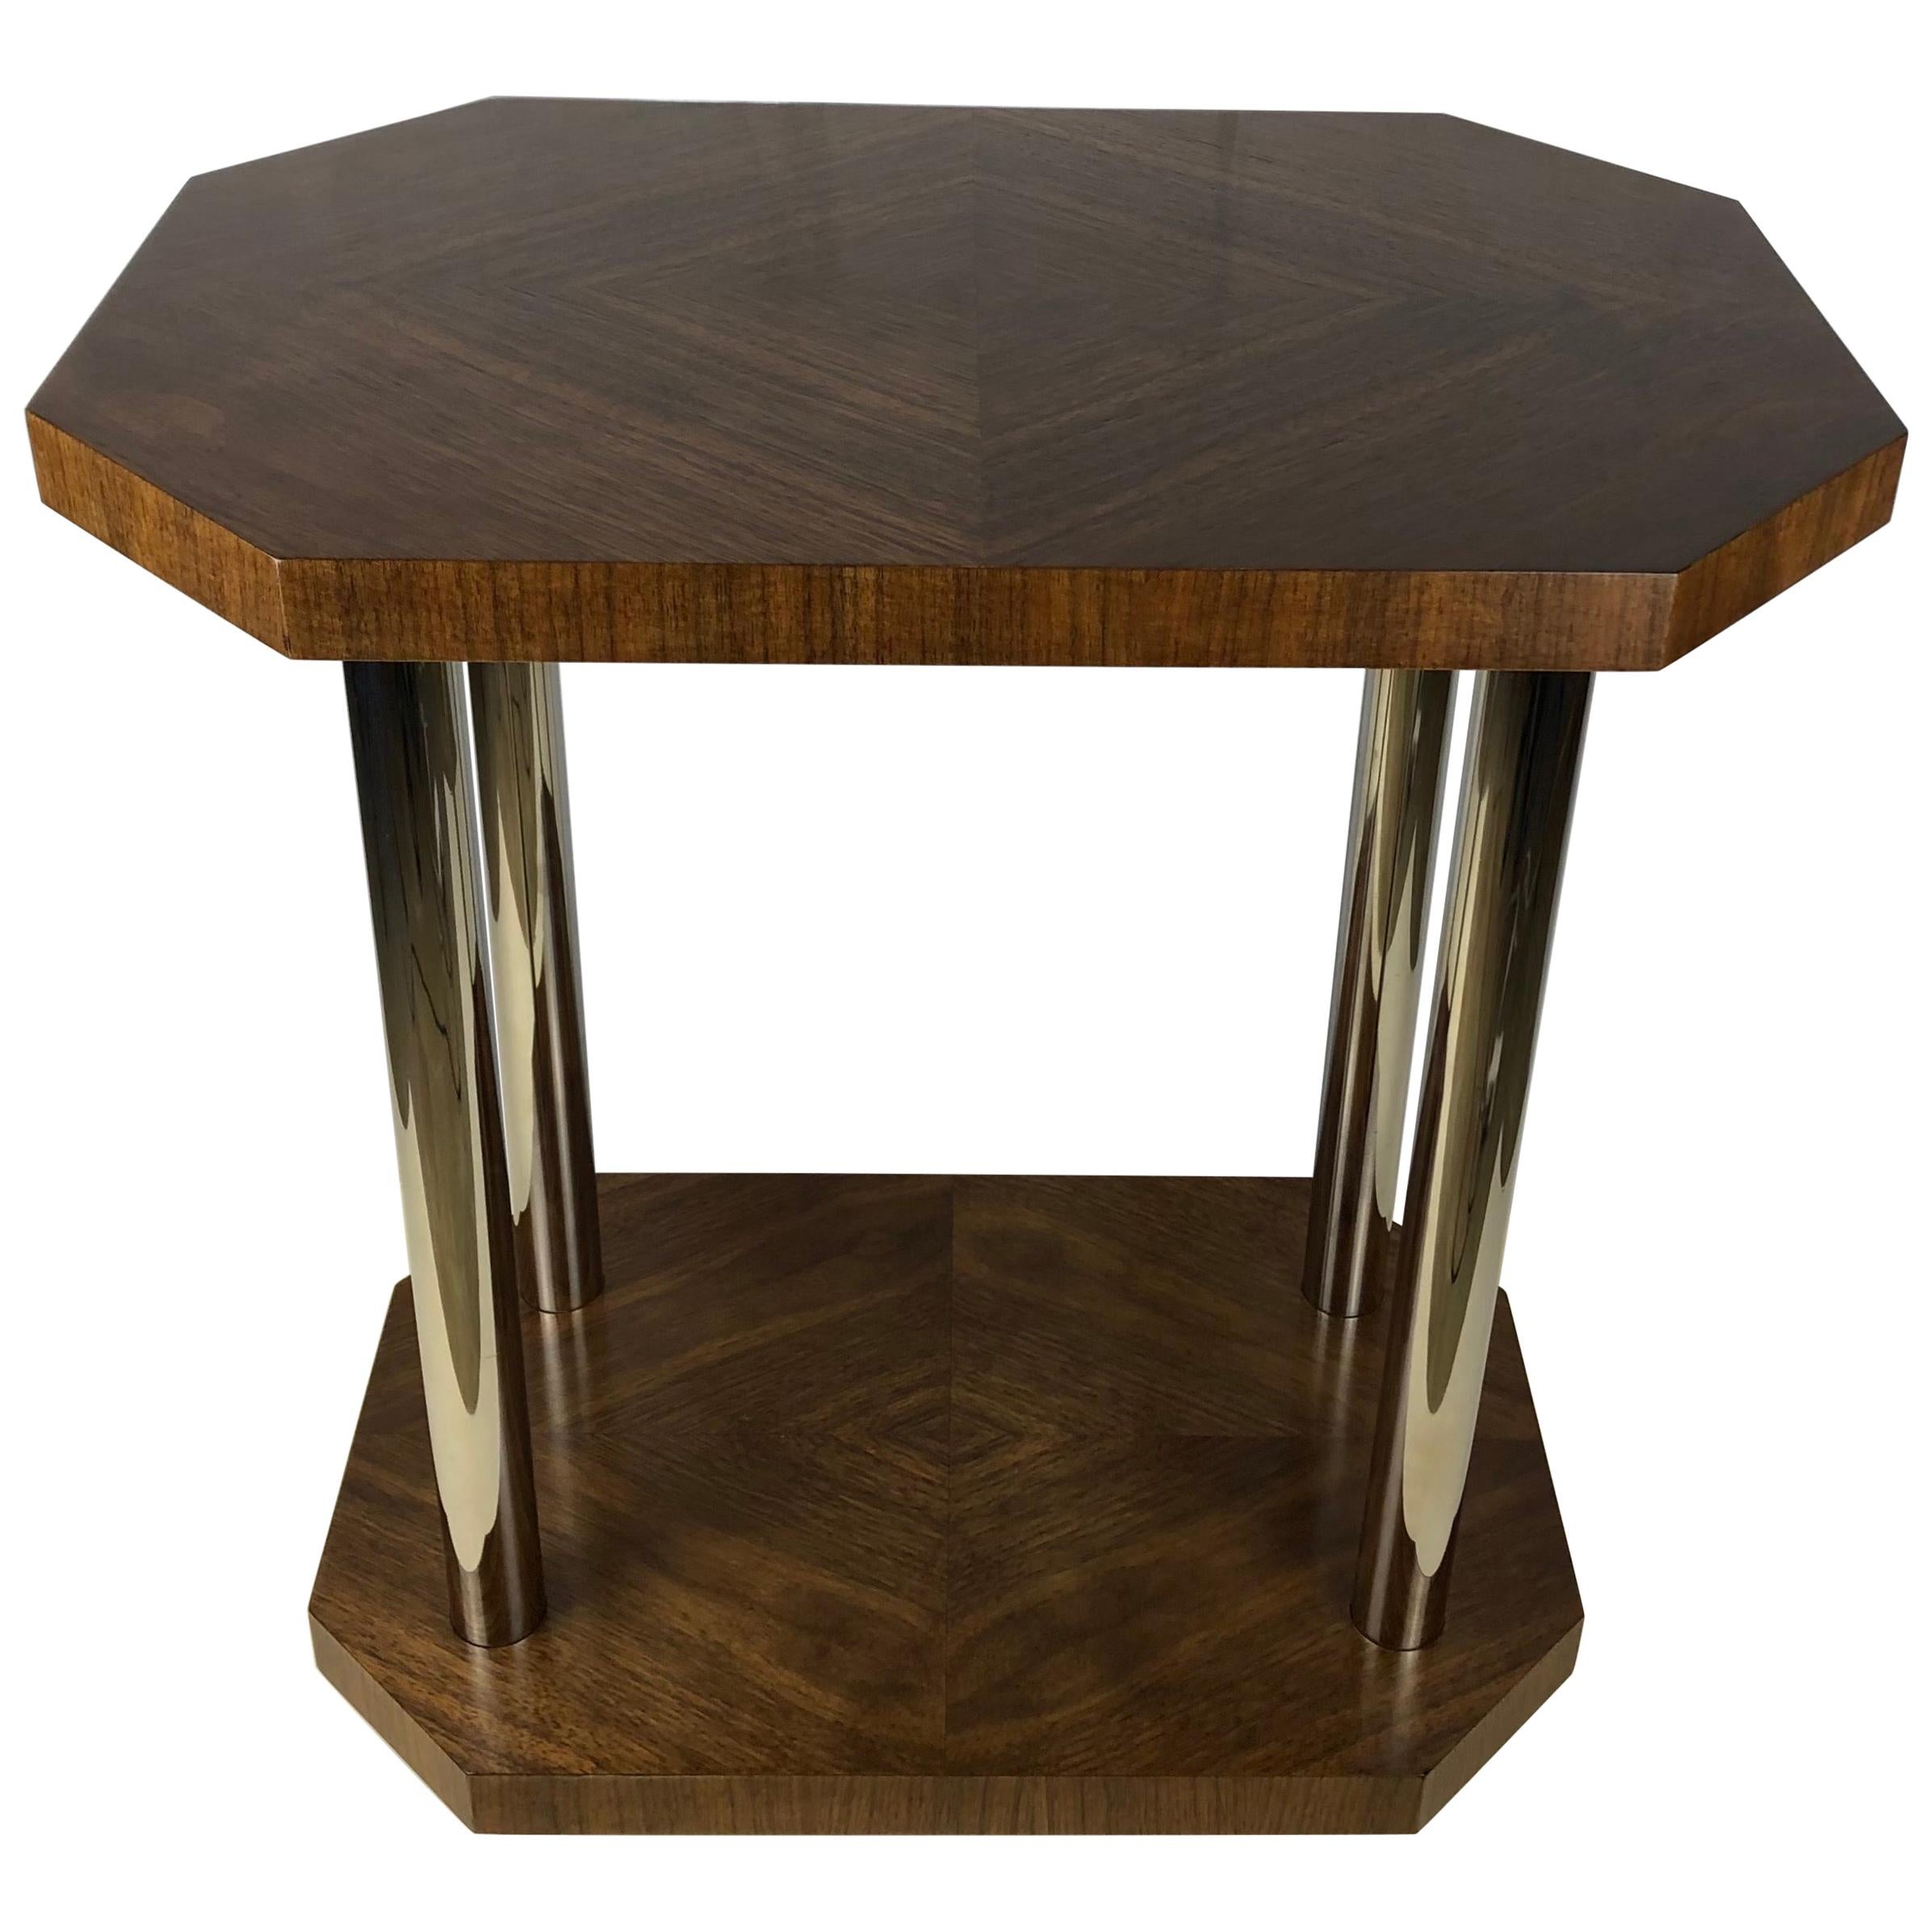 French Art Deco Two-Tiered Tubular Chrome and Walnut Side Table